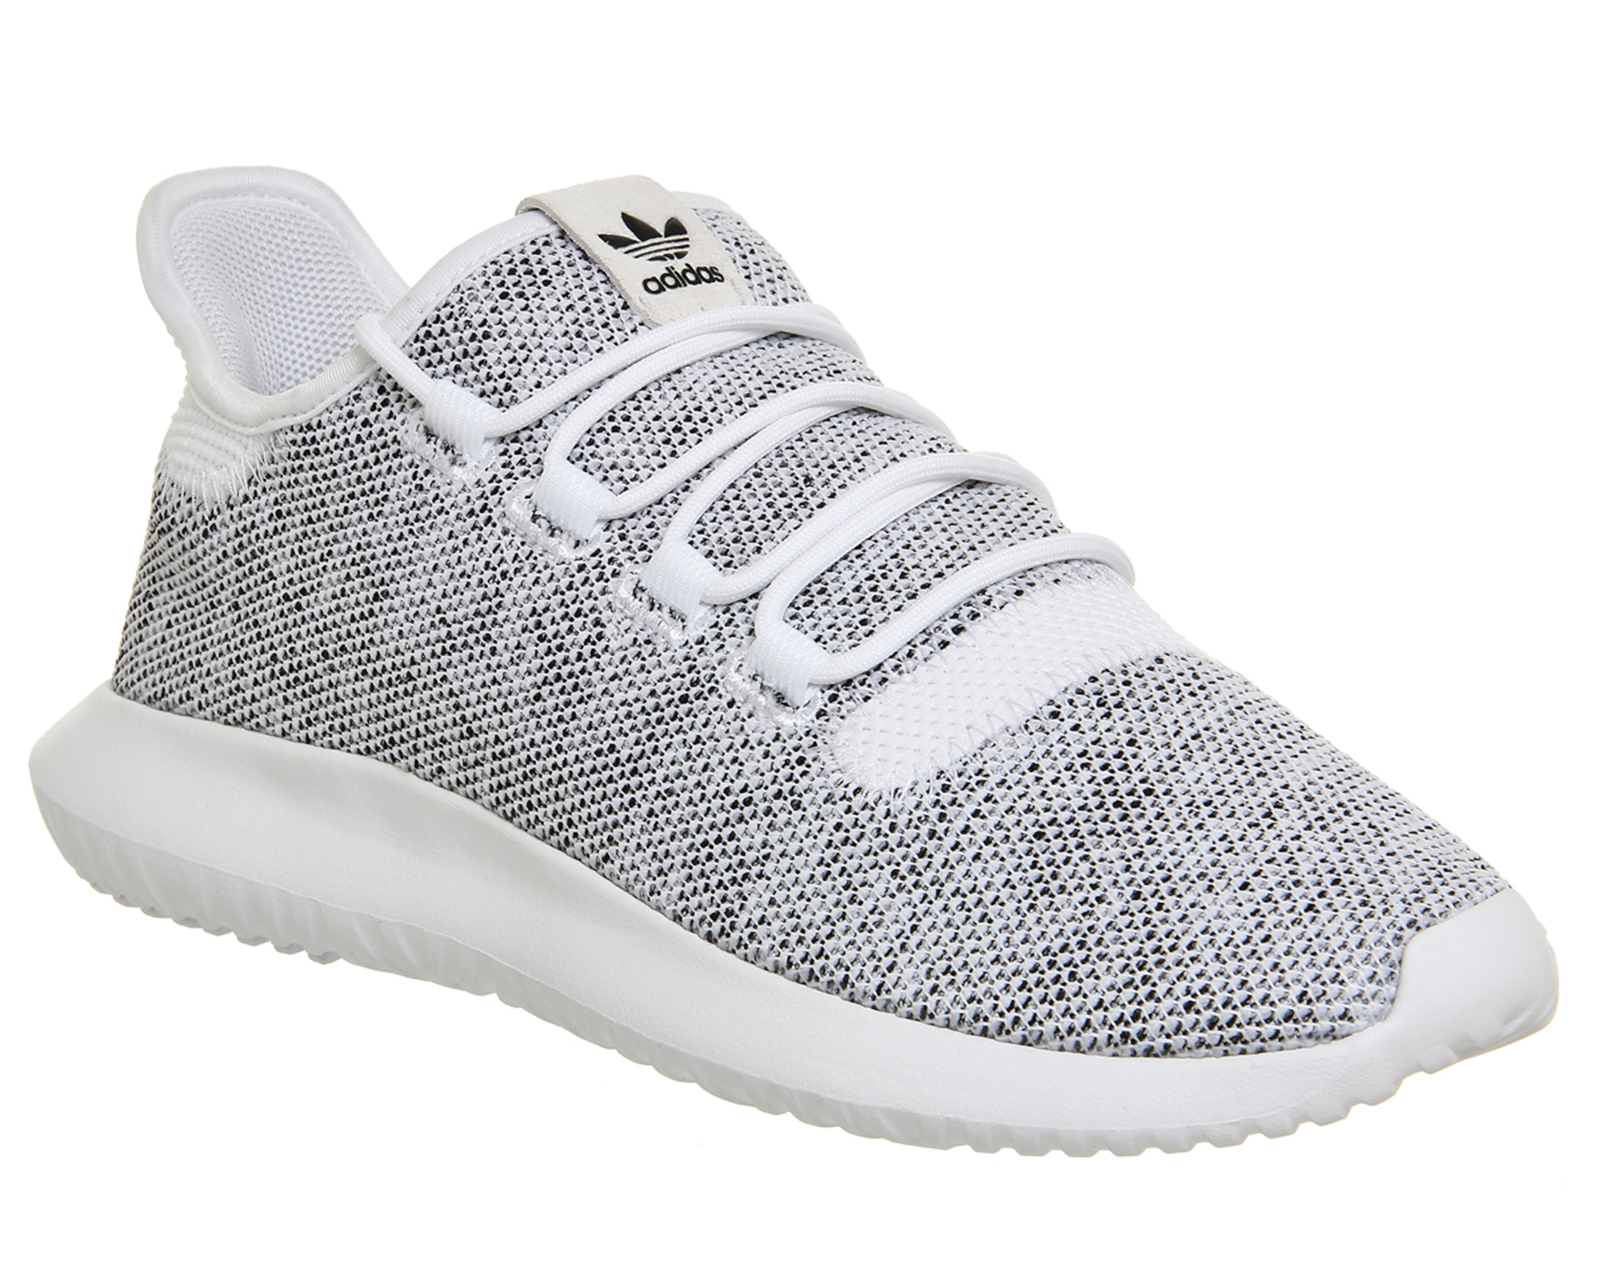 mens adidas knit trainers